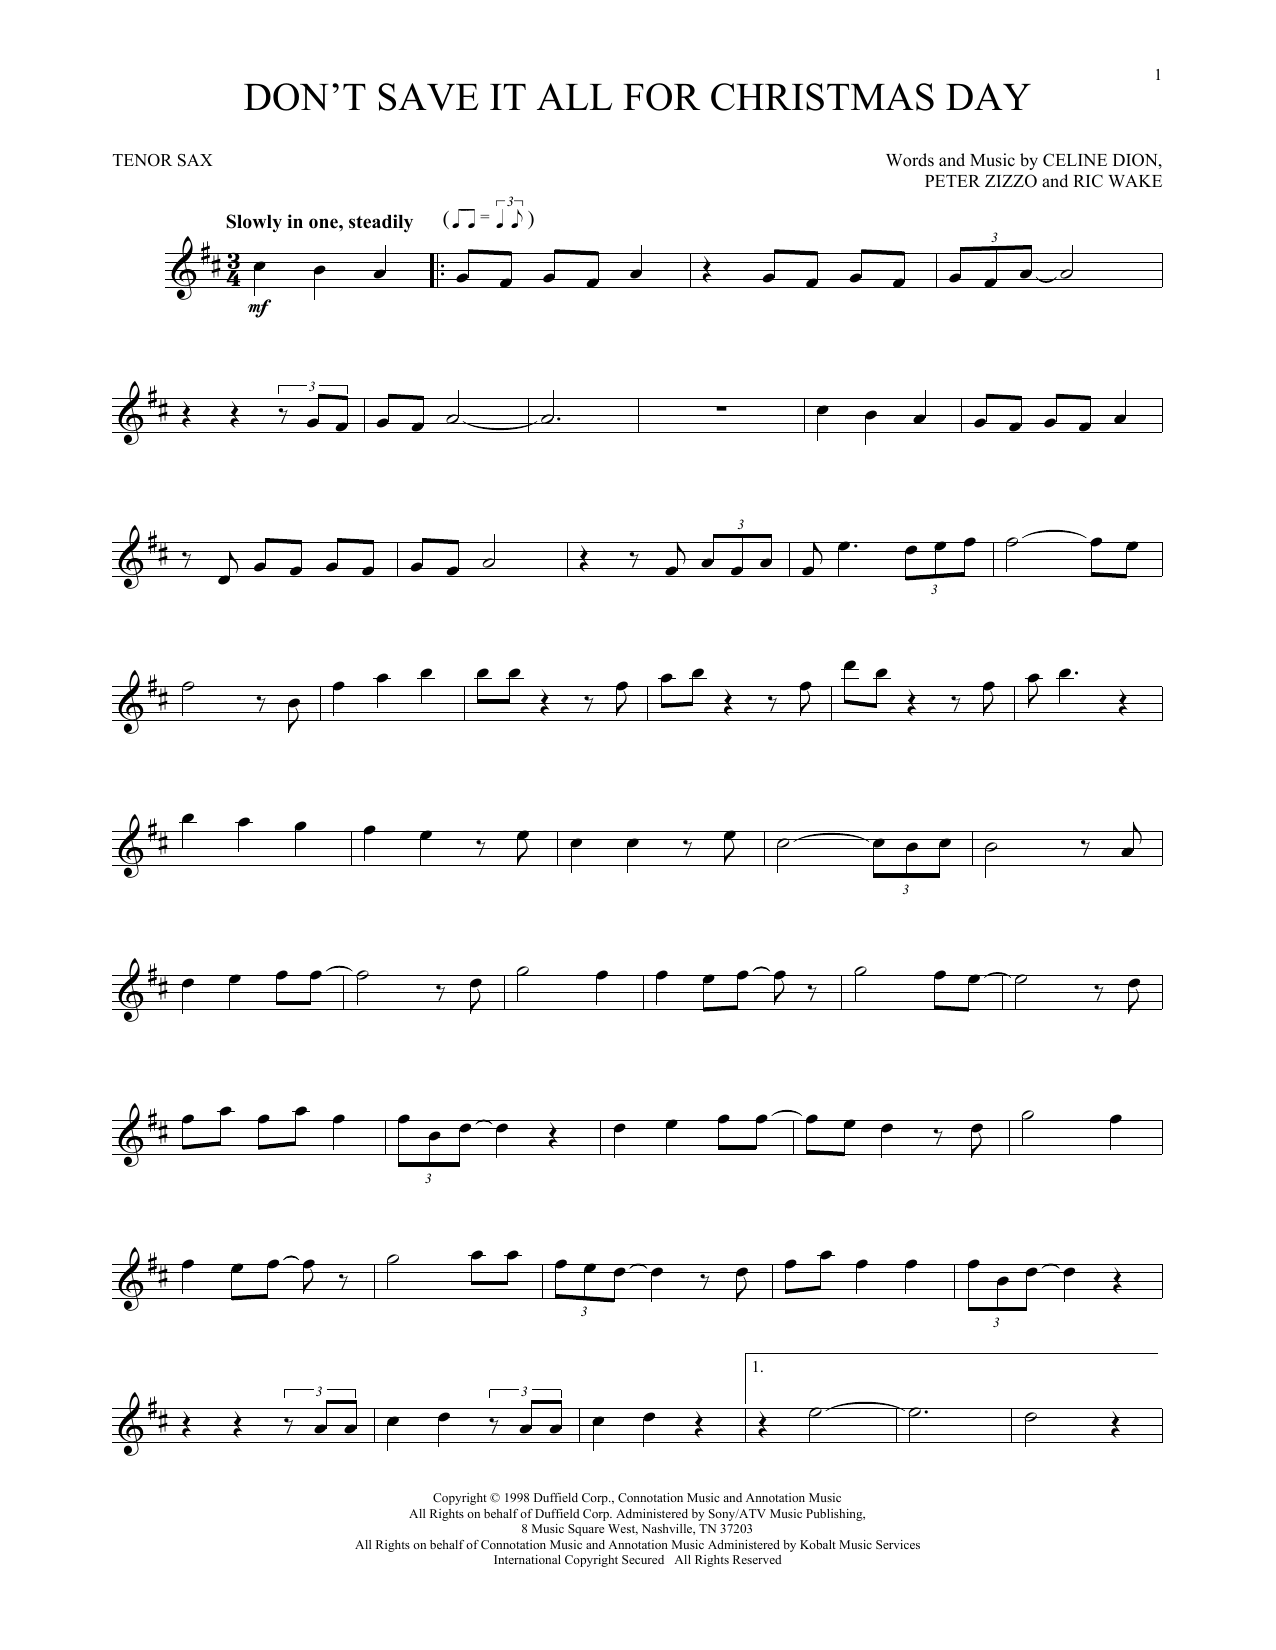 Don't Save It All For Christmas Day sheet music